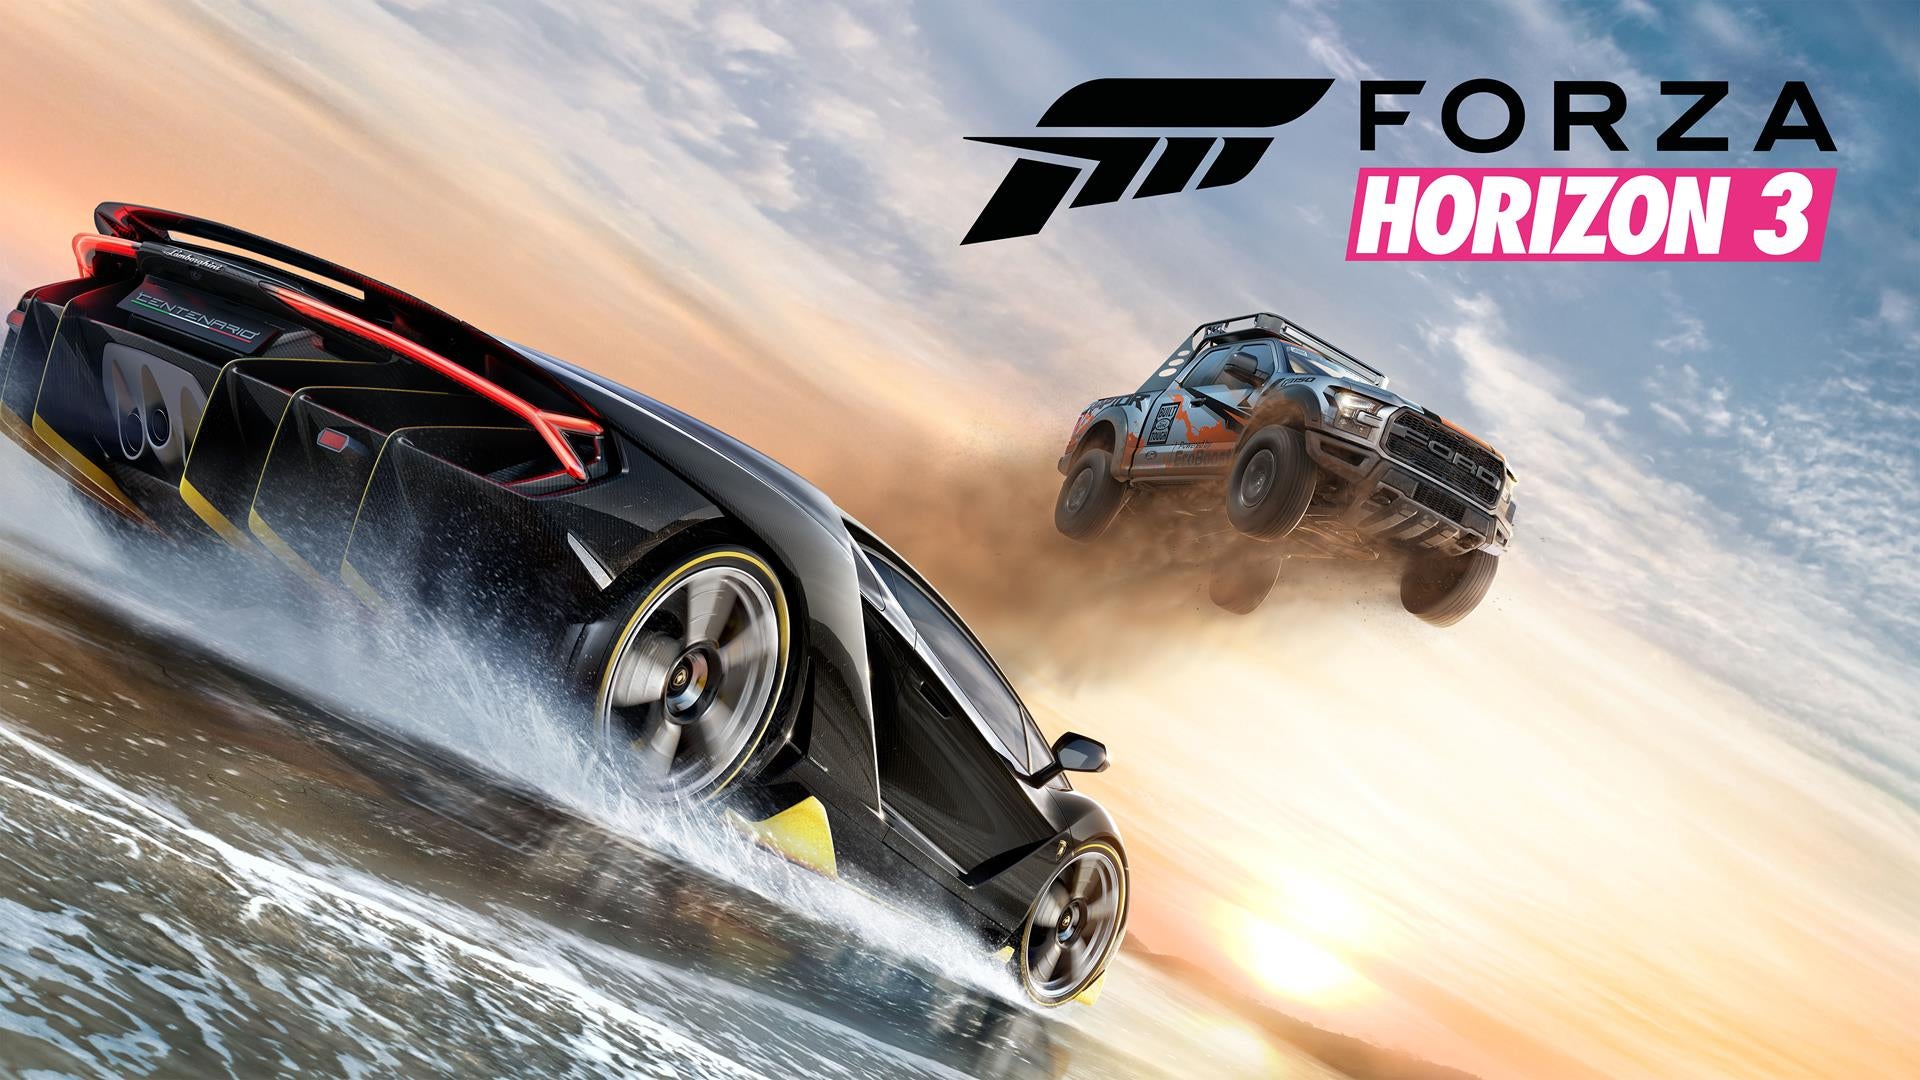 Image for Forza Horizon 3: here are the free cars you're getting for playing older Forza games